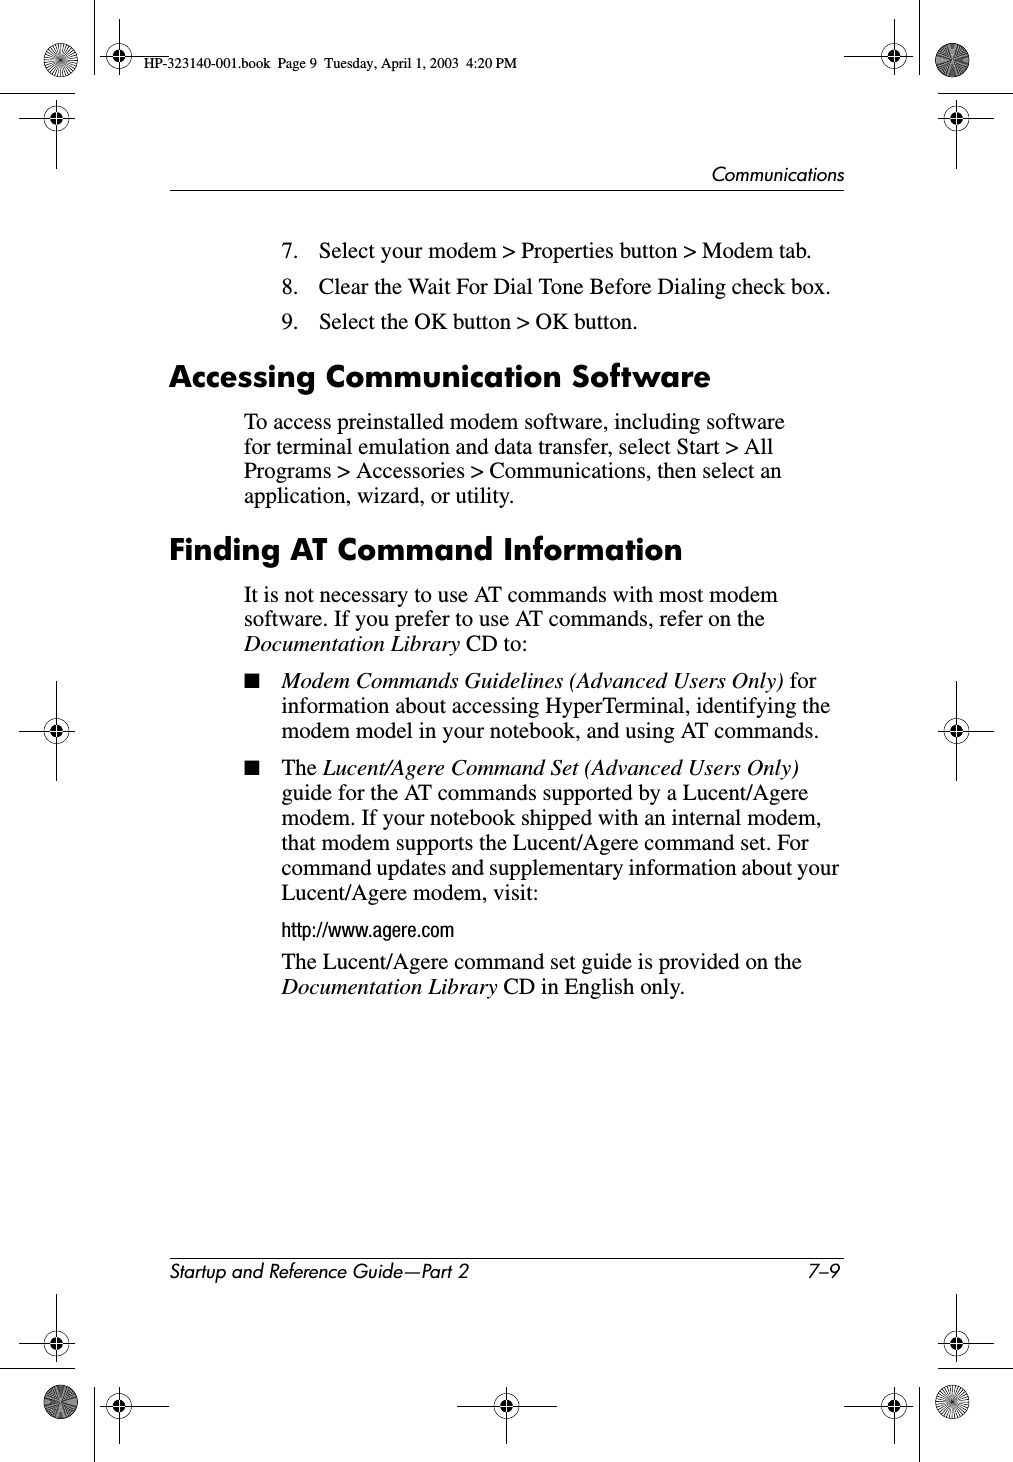 CommunicationsStartup and Reference Guide—Part 2 7–97. Select your modem &gt; Properties button &gt; Modem tab.8. Clear the Wait For Dial Tone Before Dialing check box.9. Select the OK button &gt; OK button.Accessing Communication SoftwareTo access preinstalled modem software, including software for terminal emulation and data transfer, select Start &gt; All Programs &gt; Accessories &gt; Communications, then select an application, wizard, or utility.Finding AT Command InformationIt is not necessary to use AT commands with most modem software. If you prefer to use AT commands, refer on the Documentation Library CD to:■Modem Commands Guidelines (Advanced Users Only) forinformation about accessing HyperTerminal, identifying the modem model in your notebook, and using AT commands.■The Lucent/Agere Command Set (Advanced Users Only) guide for the AT commands supported by a Lucent/Agere modem. If your notebook shipped with an internal modem, that modem supports the Lucent/Agere command set. For command updates and supplementary information about your Lucent/Agere modem, visit:http://www.agere.comThe Lucent/Agere command set guide is provided on the Documentation Library CD in English only.HP-323140-001.book  Page 9  Tuesday, April 1, 2003  4:20 PM